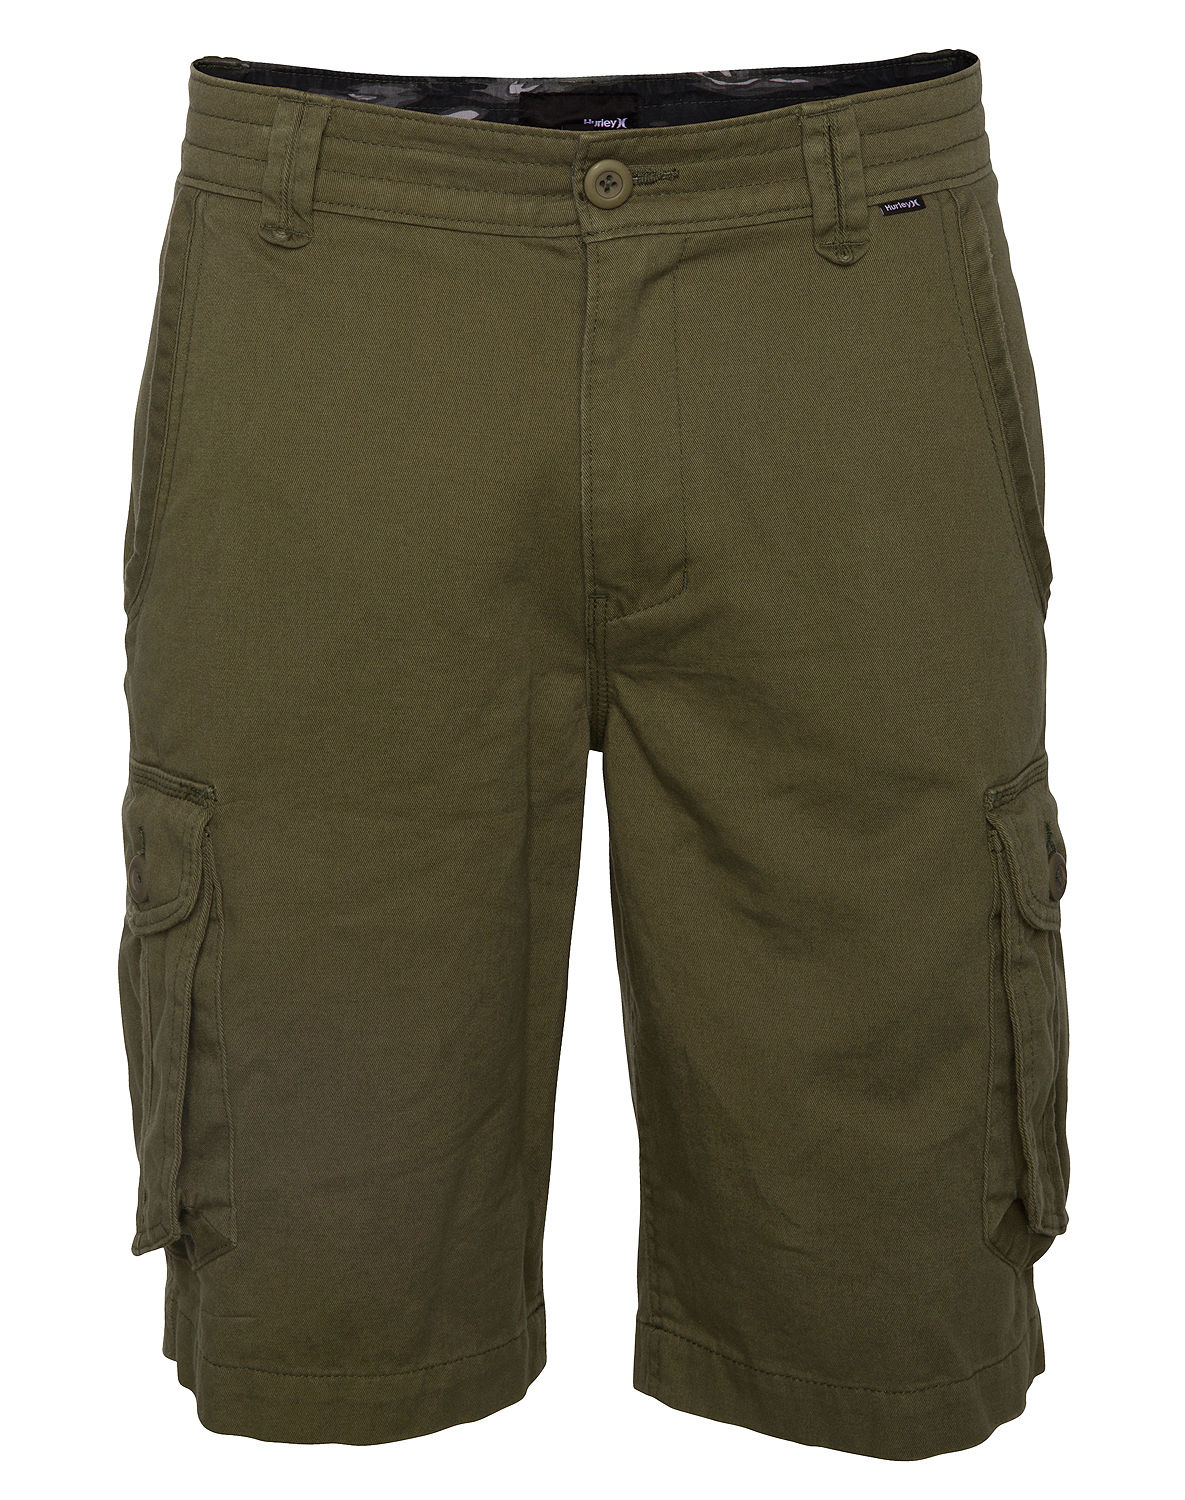 Hurley ONE & ONLY CARGO 2013  Camo Green Six Pocket Skate Surf Men's Shorts 